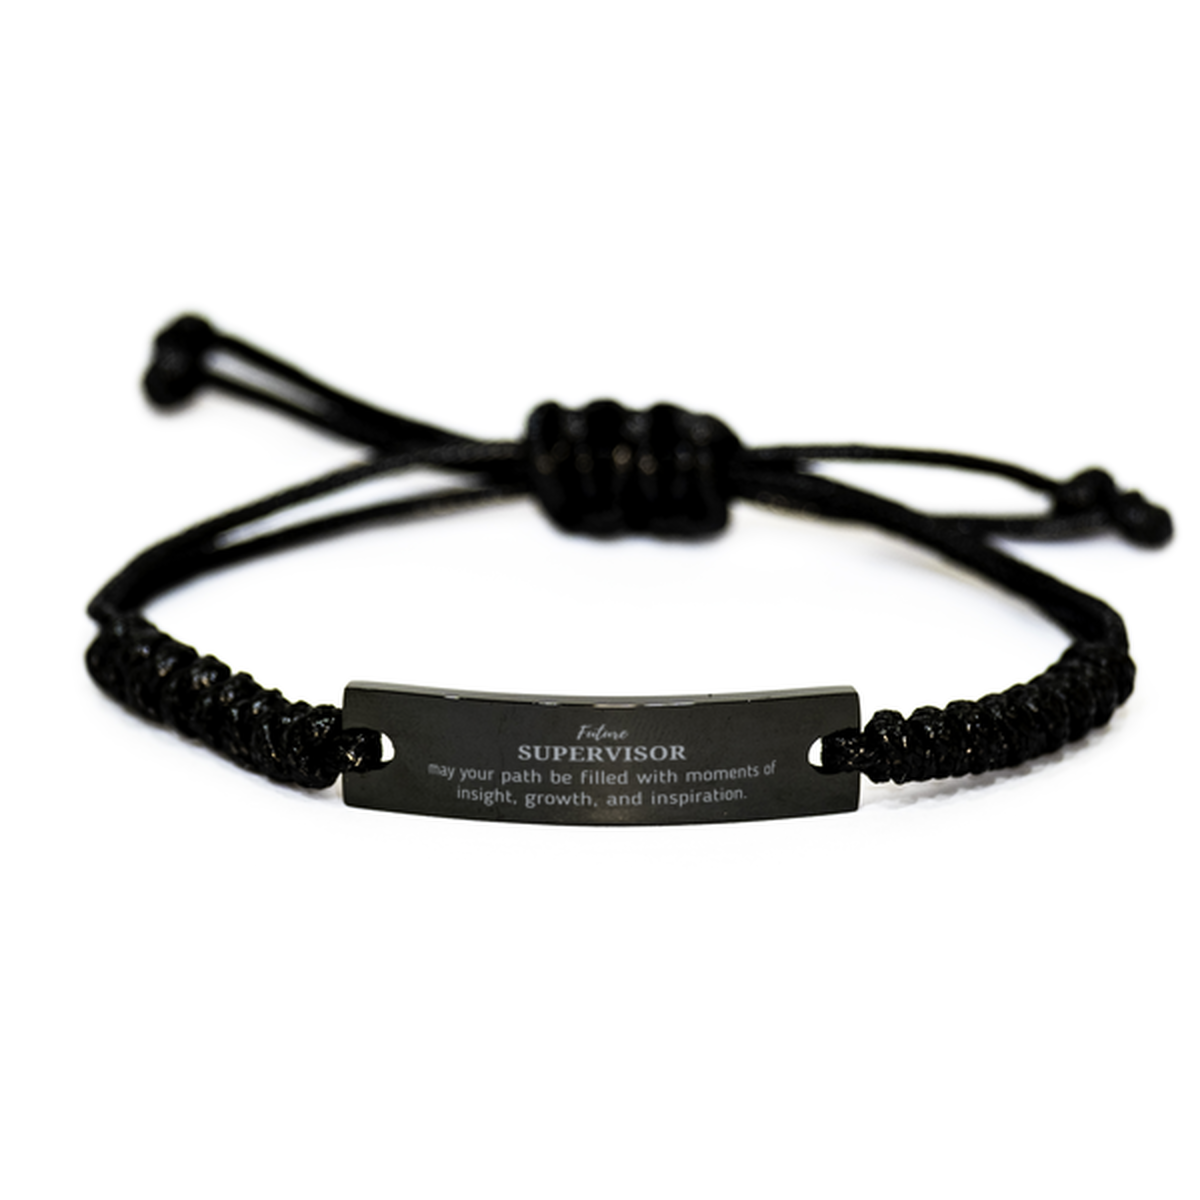 Future Supervisor Gifts, May your path be filled with moments of insight, Graduation Gifts for New Supervisor, Christmas Unique Black Rope Bracelet For Men, Women, Friends